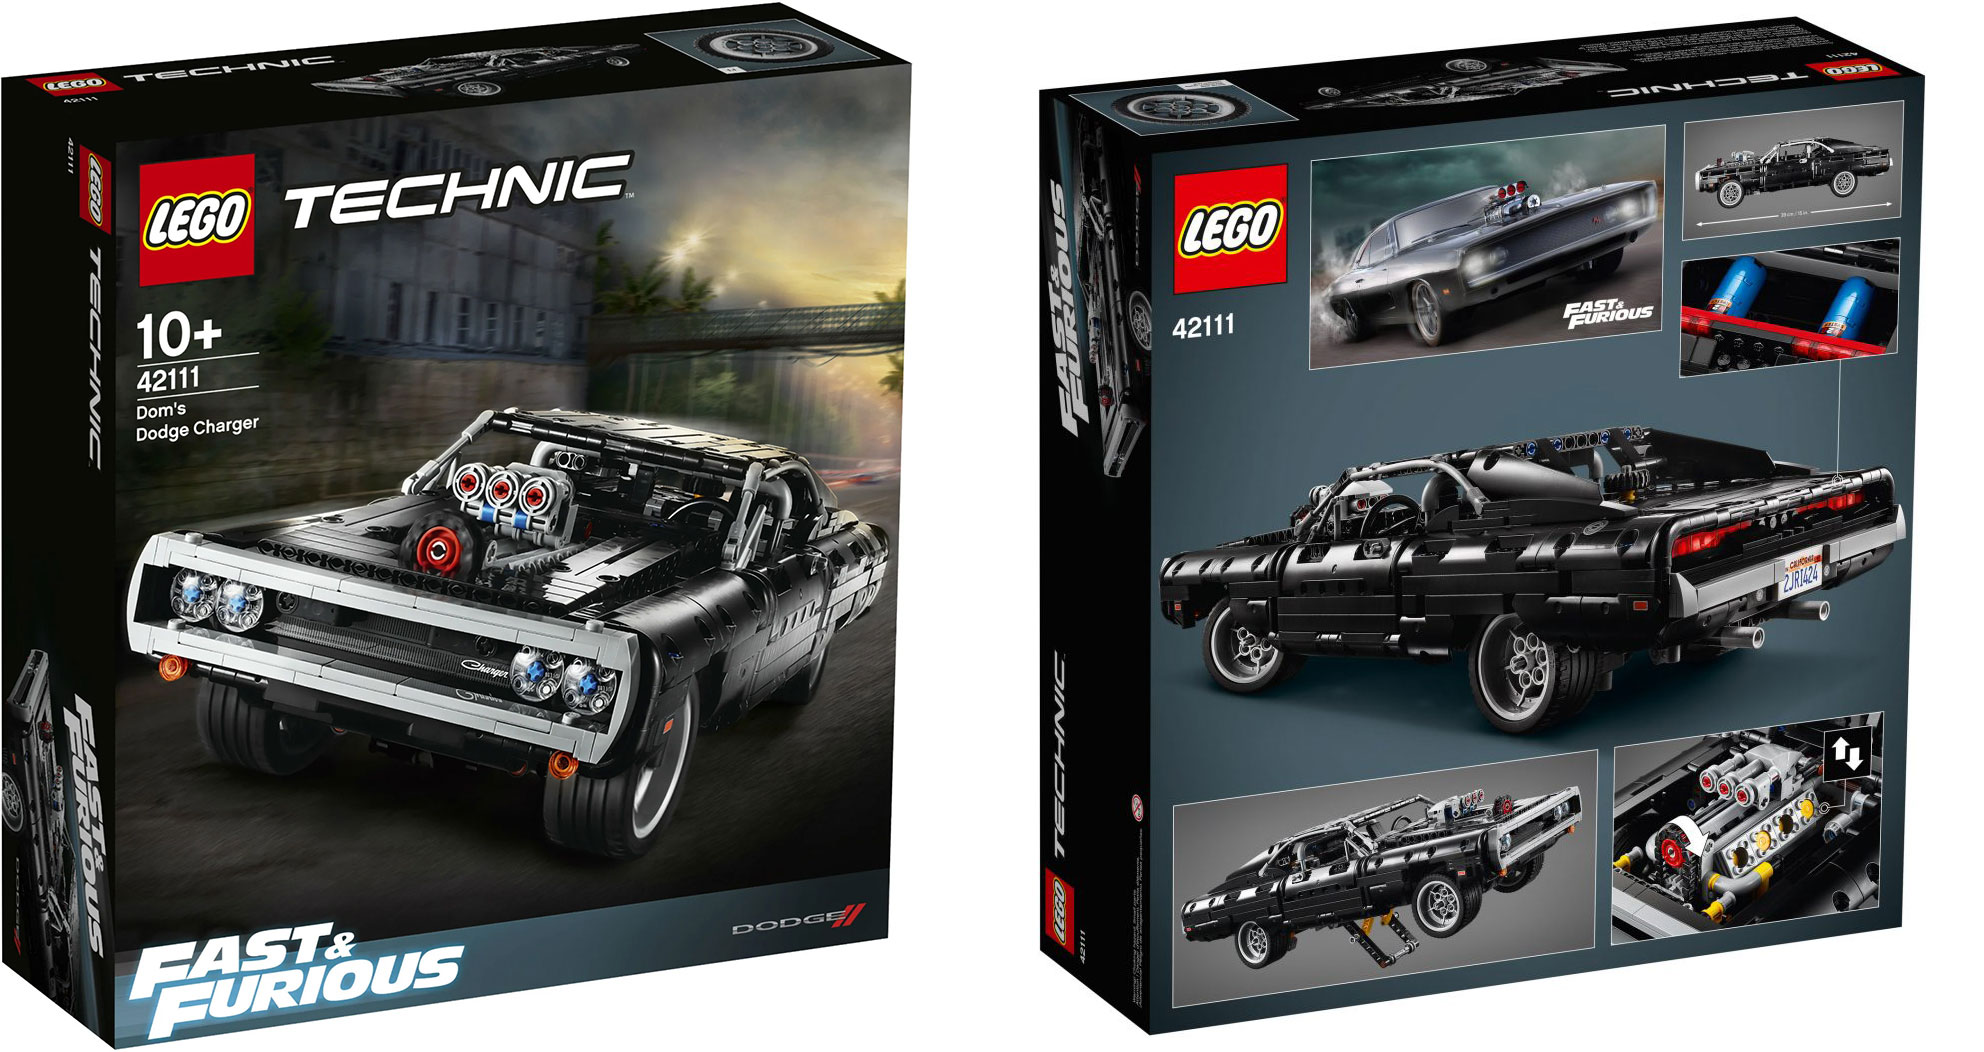 lego-technic-fast-furious-42111-doms-dodge-charger-qhe0q-5-888×1024